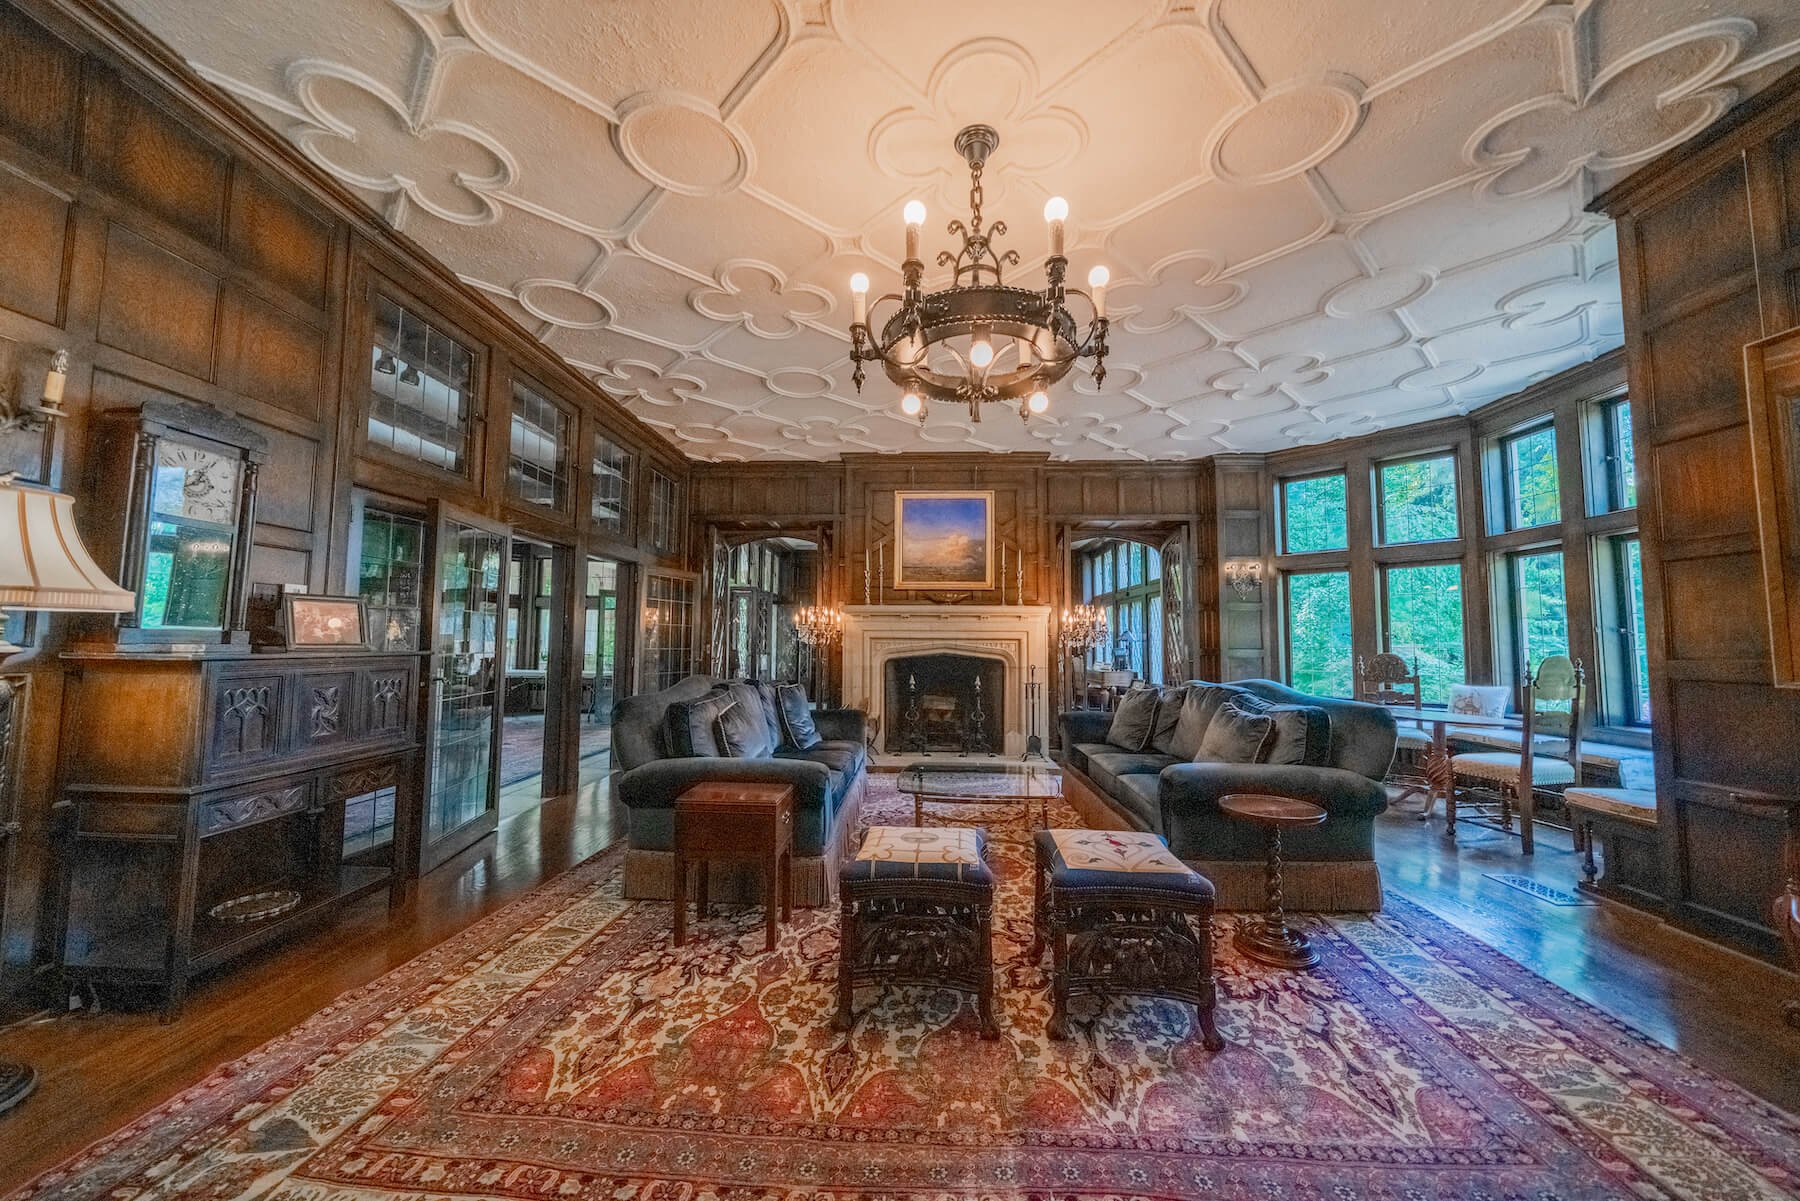  The Friends of the Ohio Governor’s Residence and Heritage Garden partnered with then First Lady Karen Kasich in 2010s to enhance the Residence’s interior to include additional era-specific furnishings from the 1920s. This includes the couches and ch